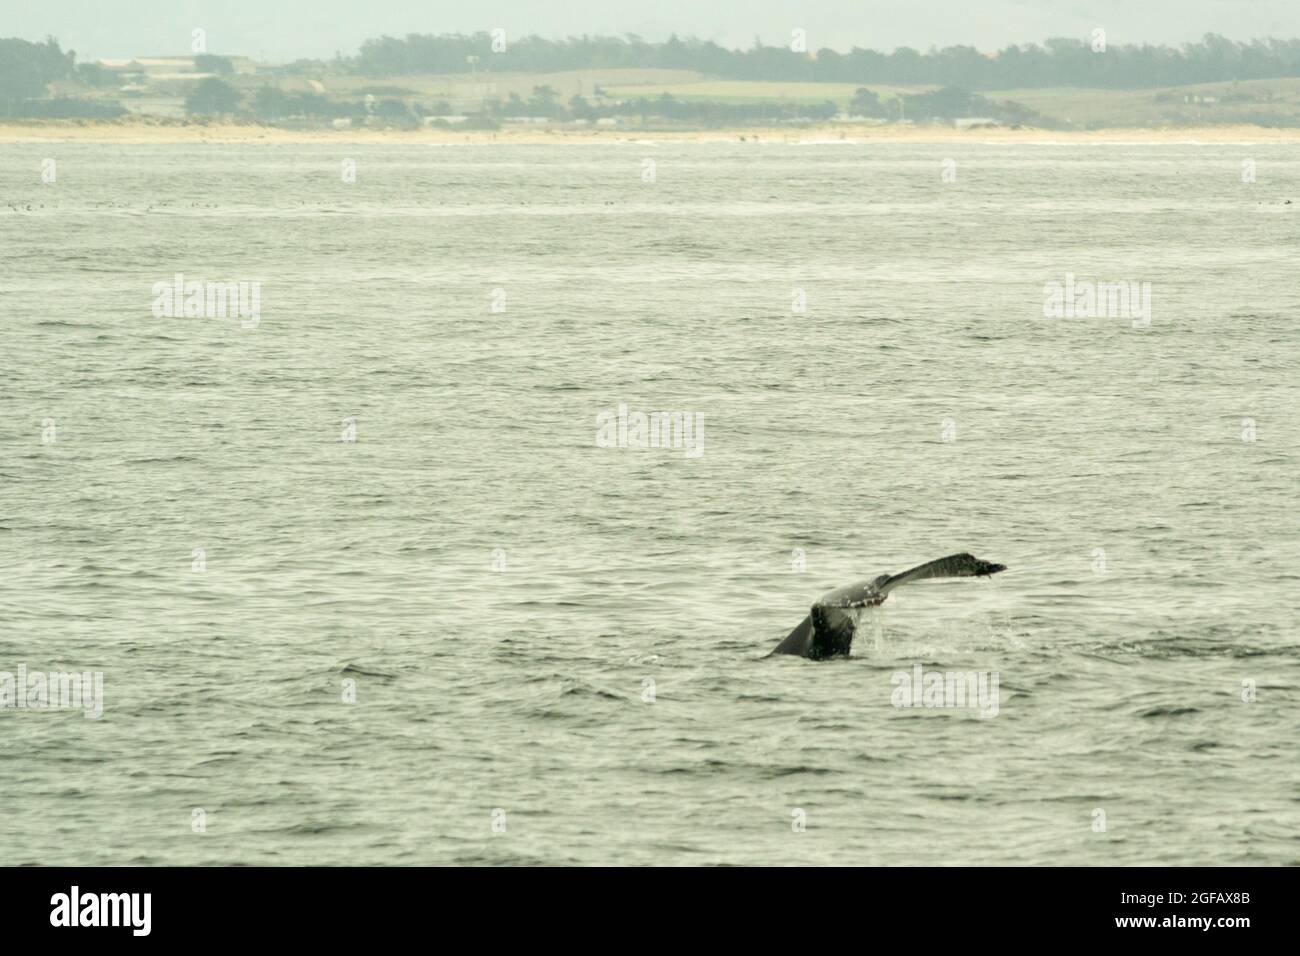 The tail of a Humpback Whale swimming in Monterey Bay, not far from the shore. The coast at Moss Landing can be seen in the background. Stock Photo